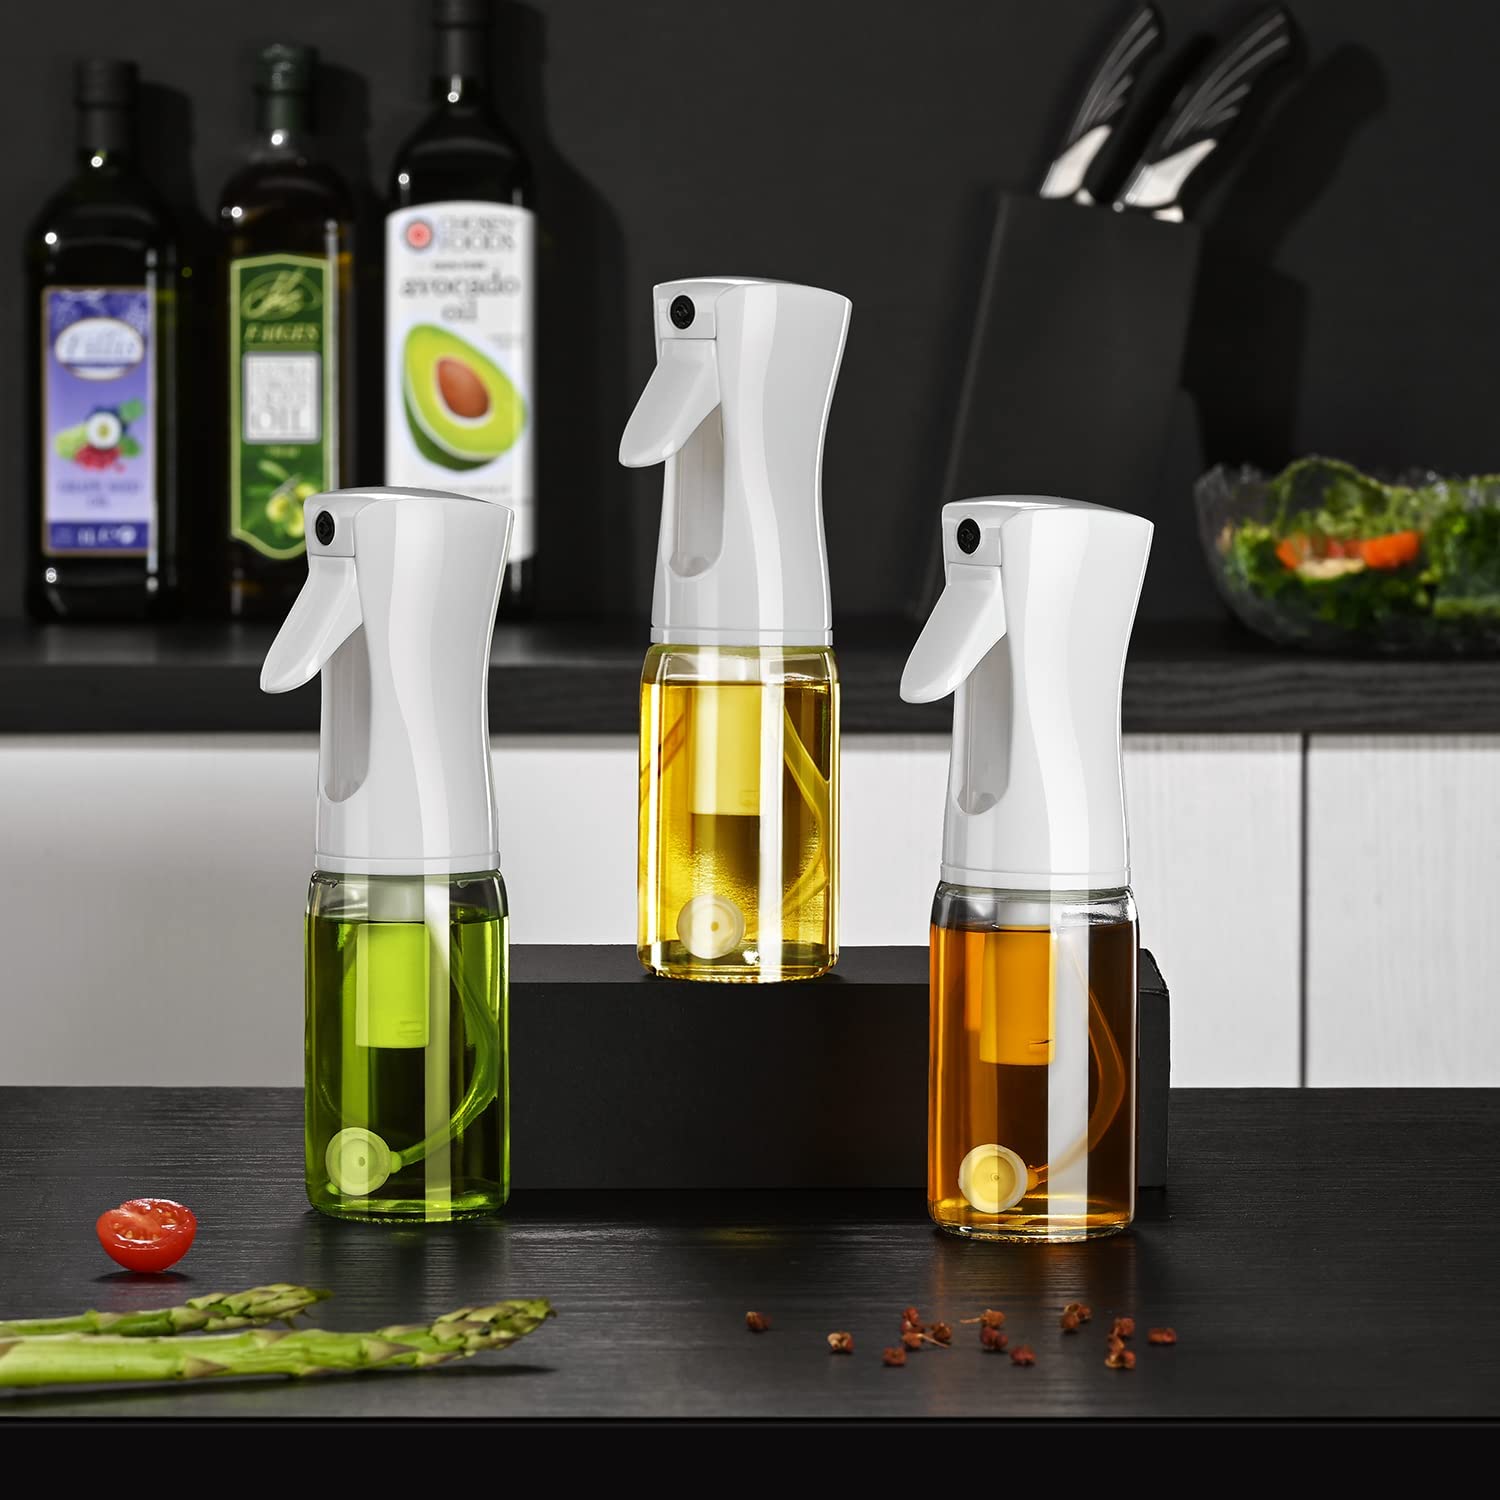 Oil]] [Sprayer Bottle for Cooking, 200ml Glass Olive Oil Mister, Kitchen  Gadgets Accessories for Air Fryer, Canola [[Oil]] Spritzer, Widely Used for  Salad Making, Baking, Frying, BBQ - Yahoo Shopping